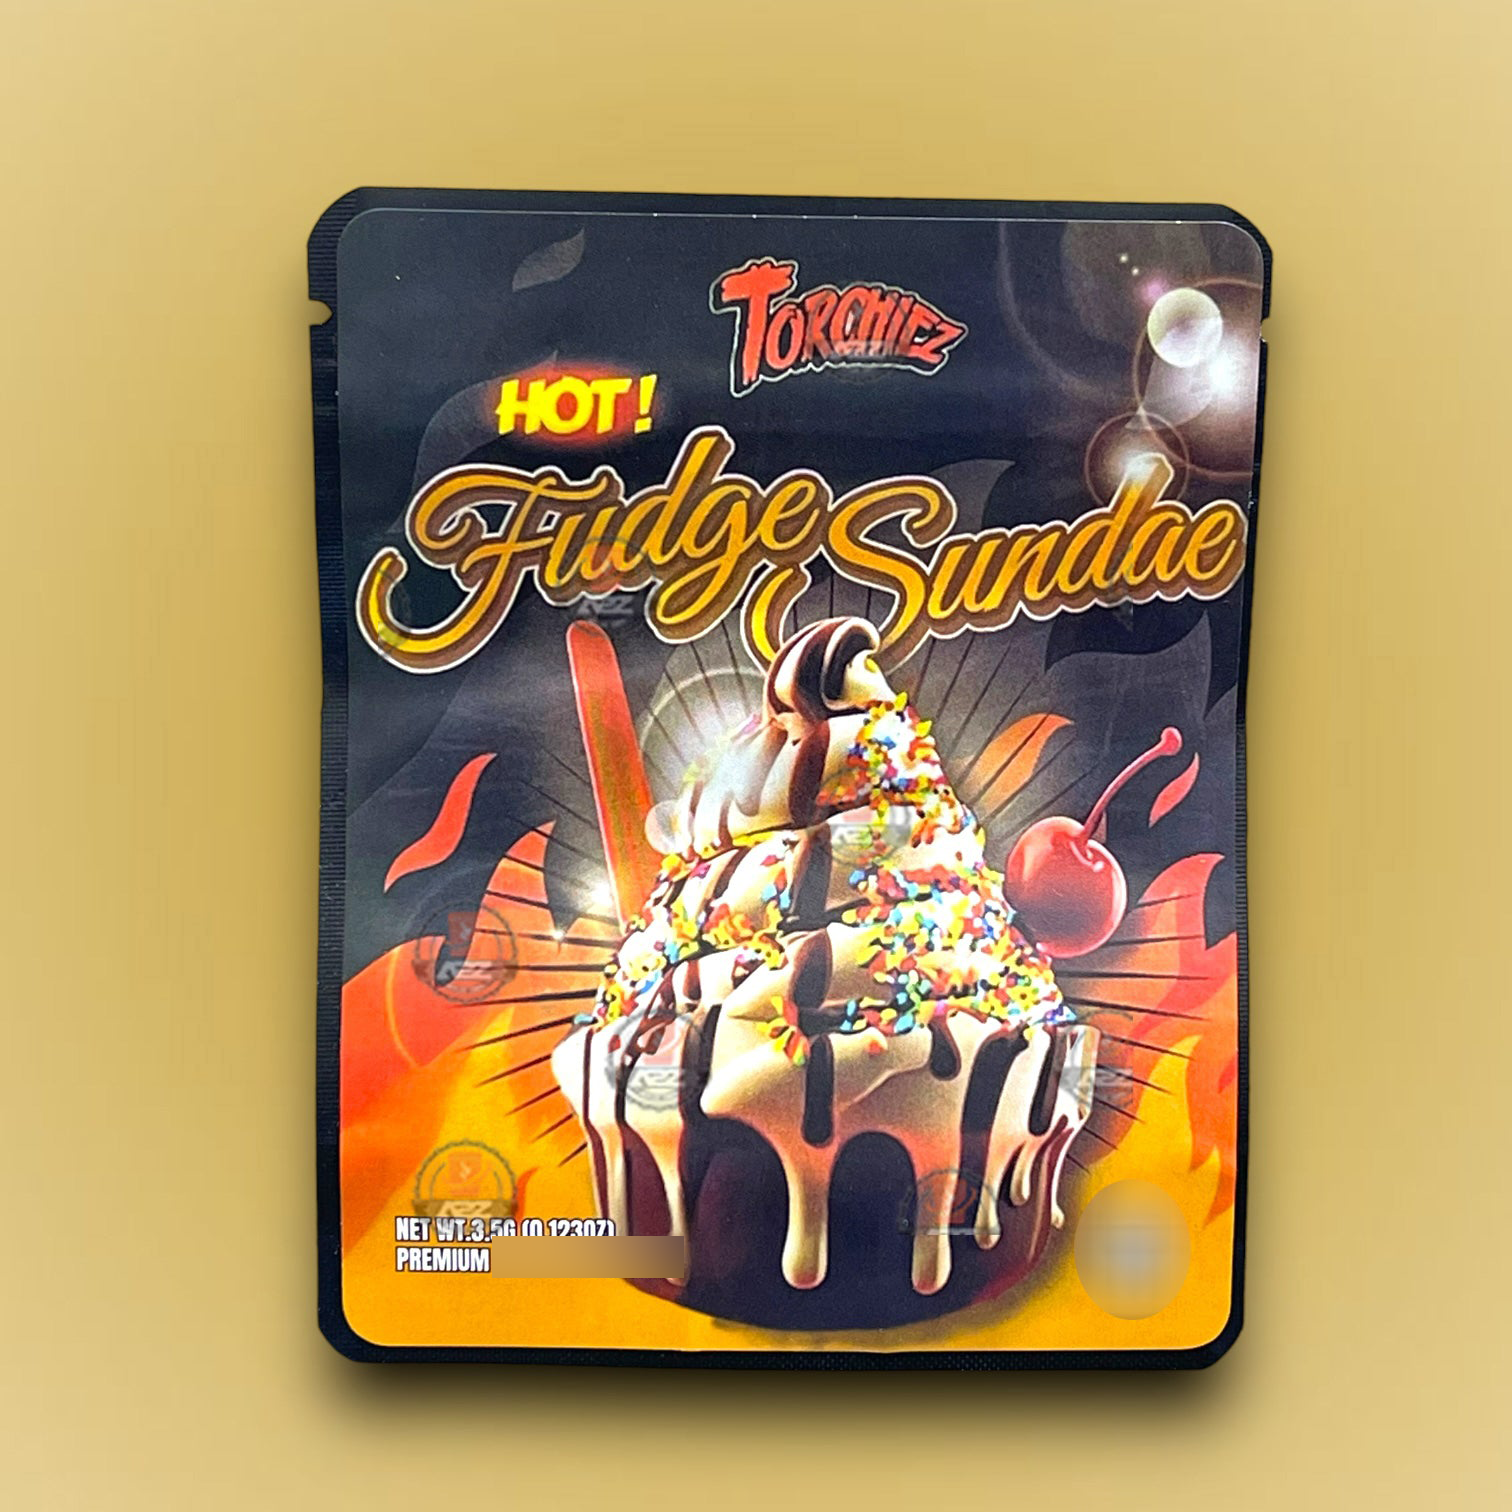 Sprinklez Torchiez Hot Fudge Sundae 3.5G Mylar Bags -With stickers and labels